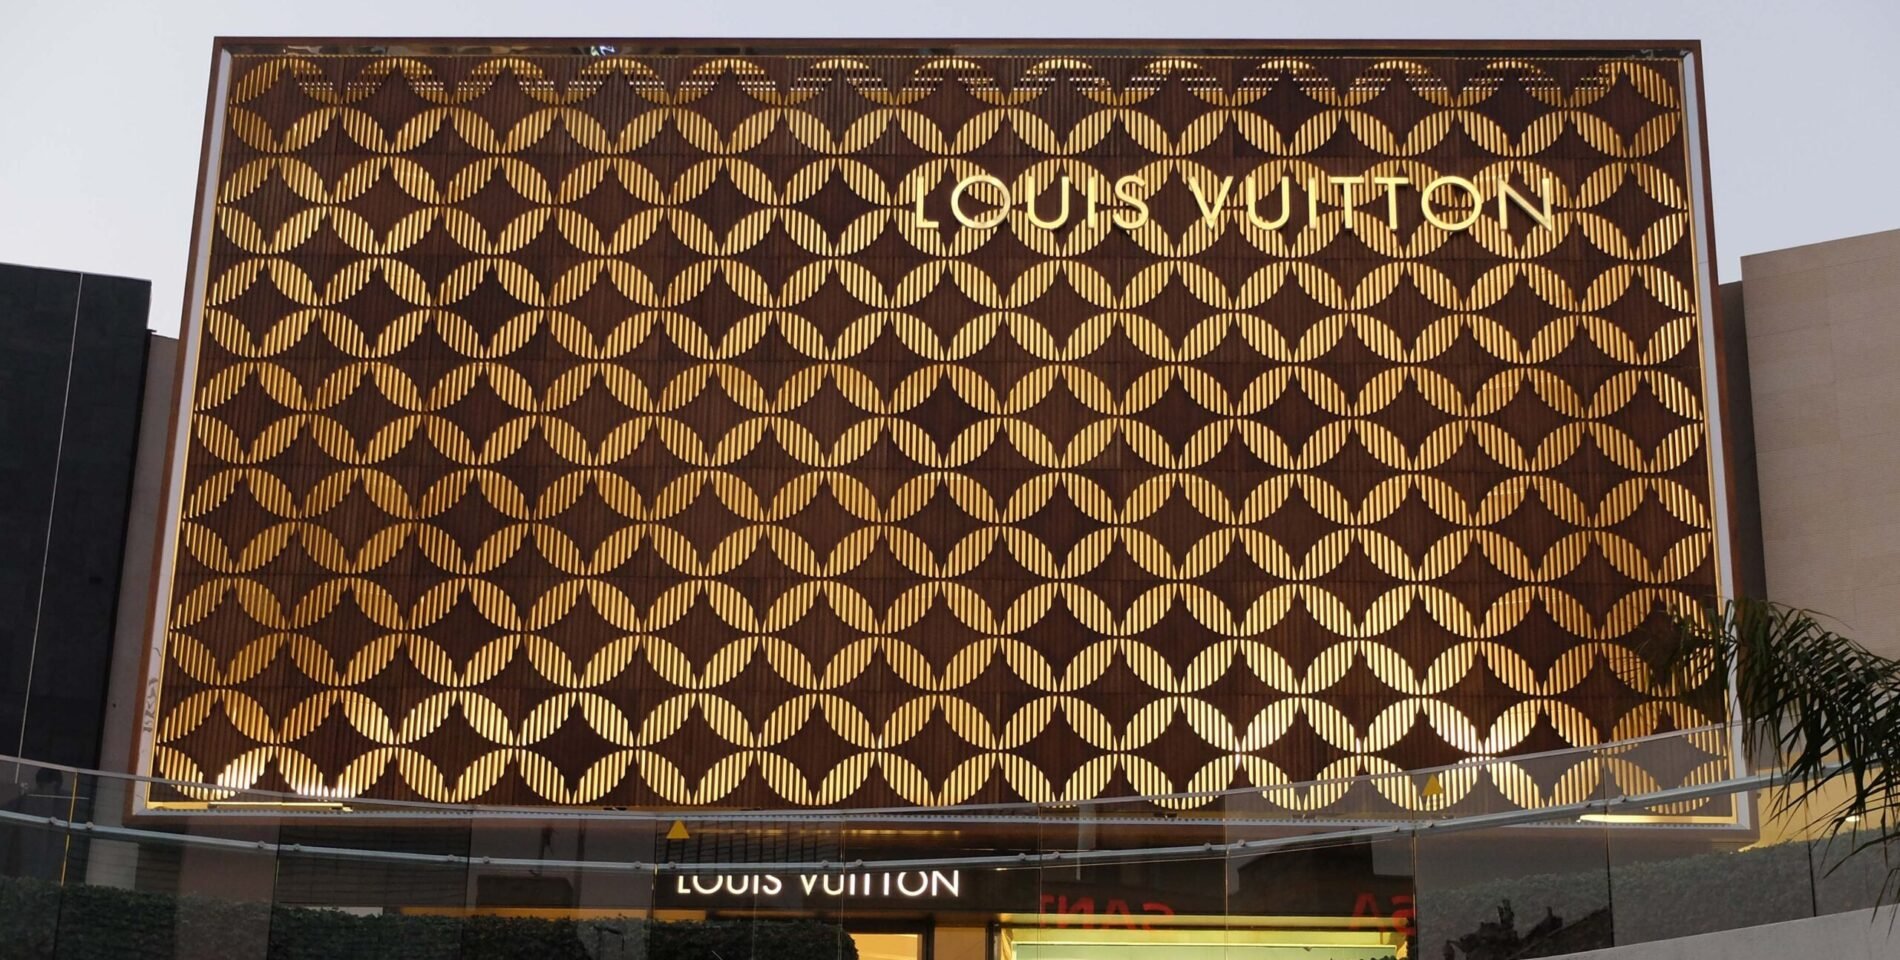 Louis Vuitton Macarons Dubai  French Macarons with Message  Order Online  to UAE  The Perfect Gift Dubai